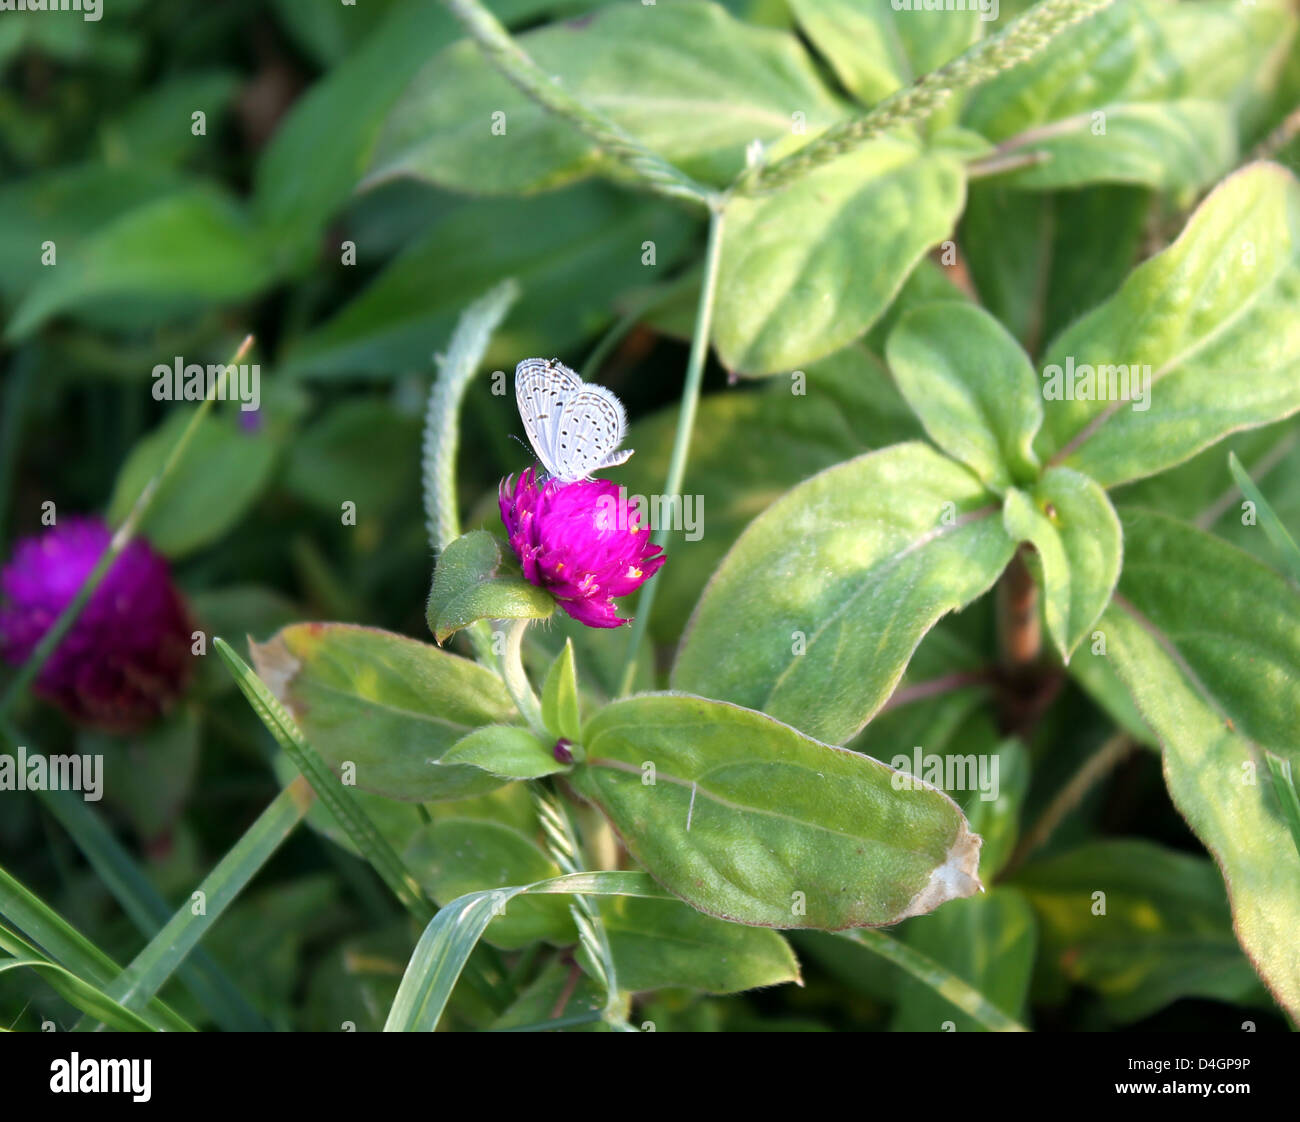 A small white butterfly on a Bachelor's button flower Stock Photo